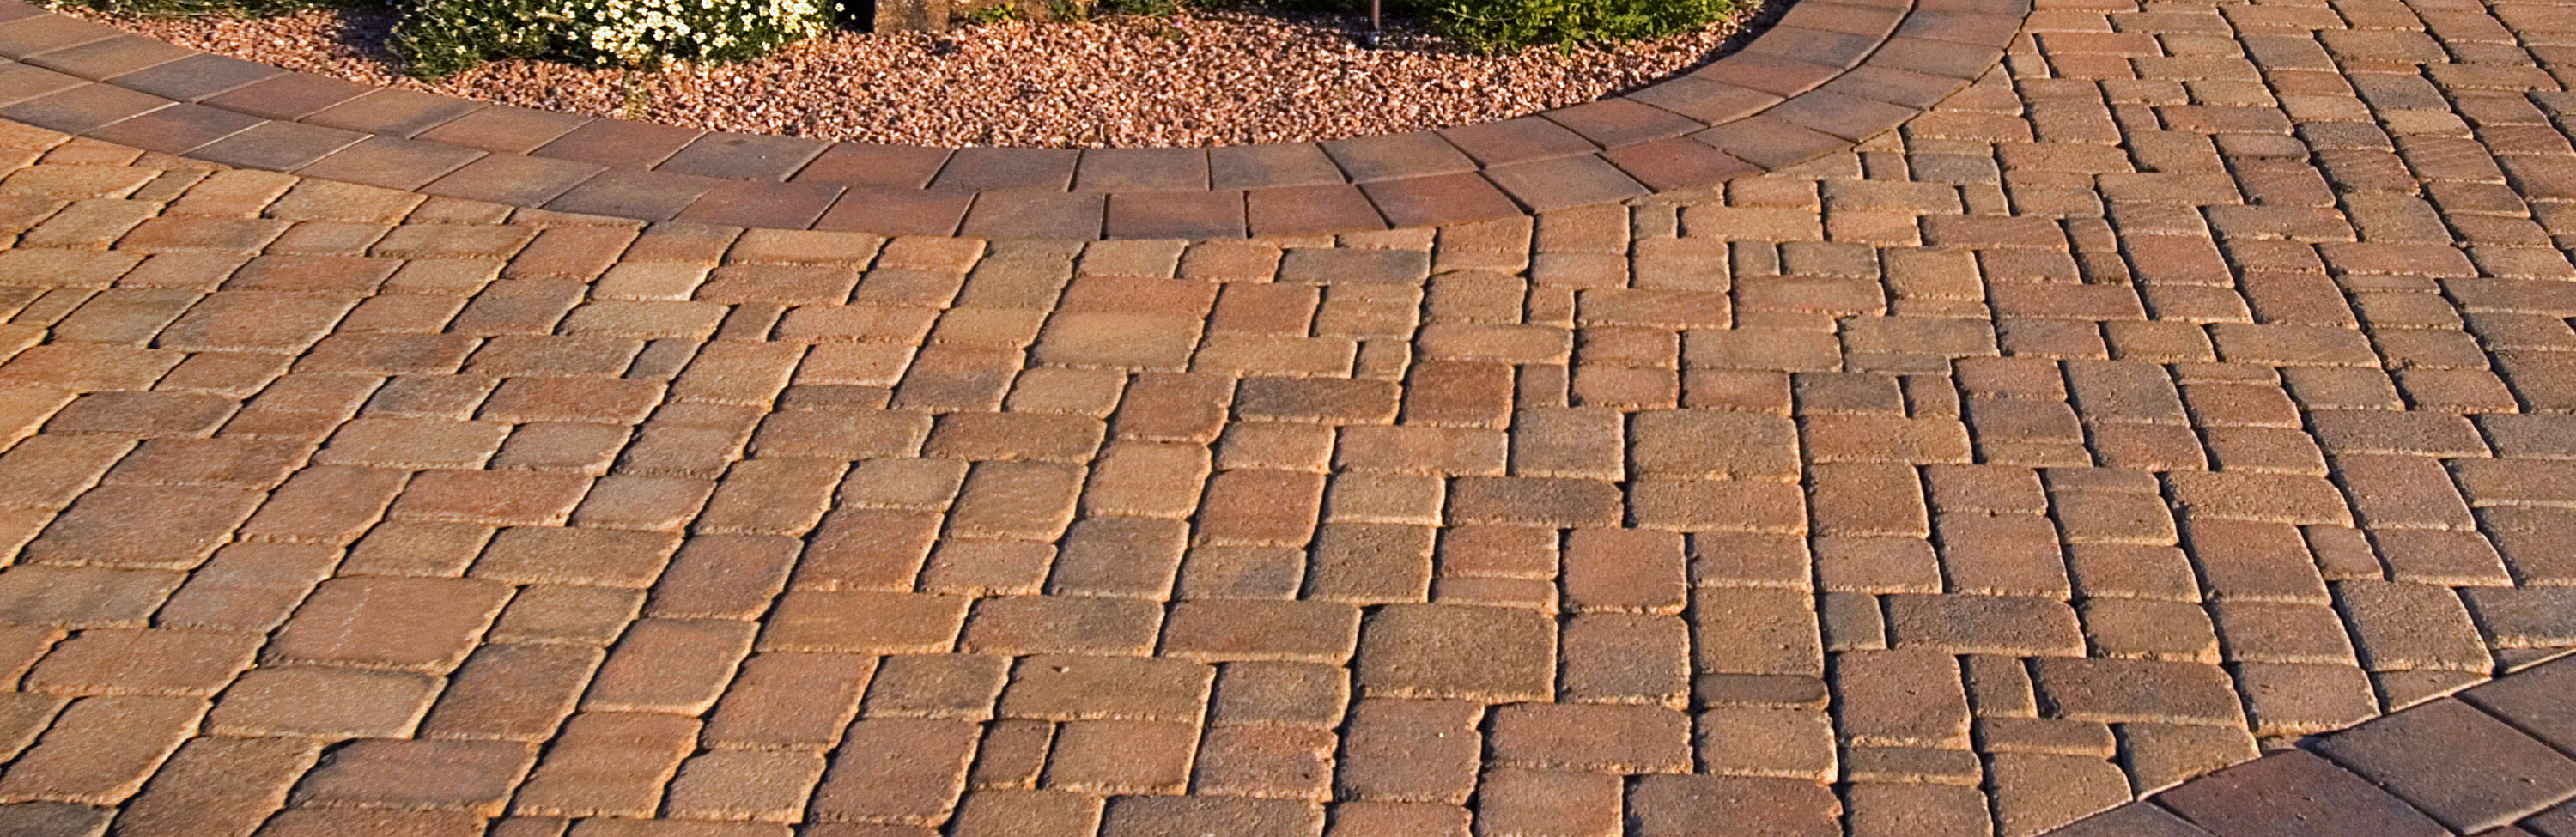 Photograph of Phoenix Paver's Tumbled Pavers in parking area around a 3 bowled water fountain.